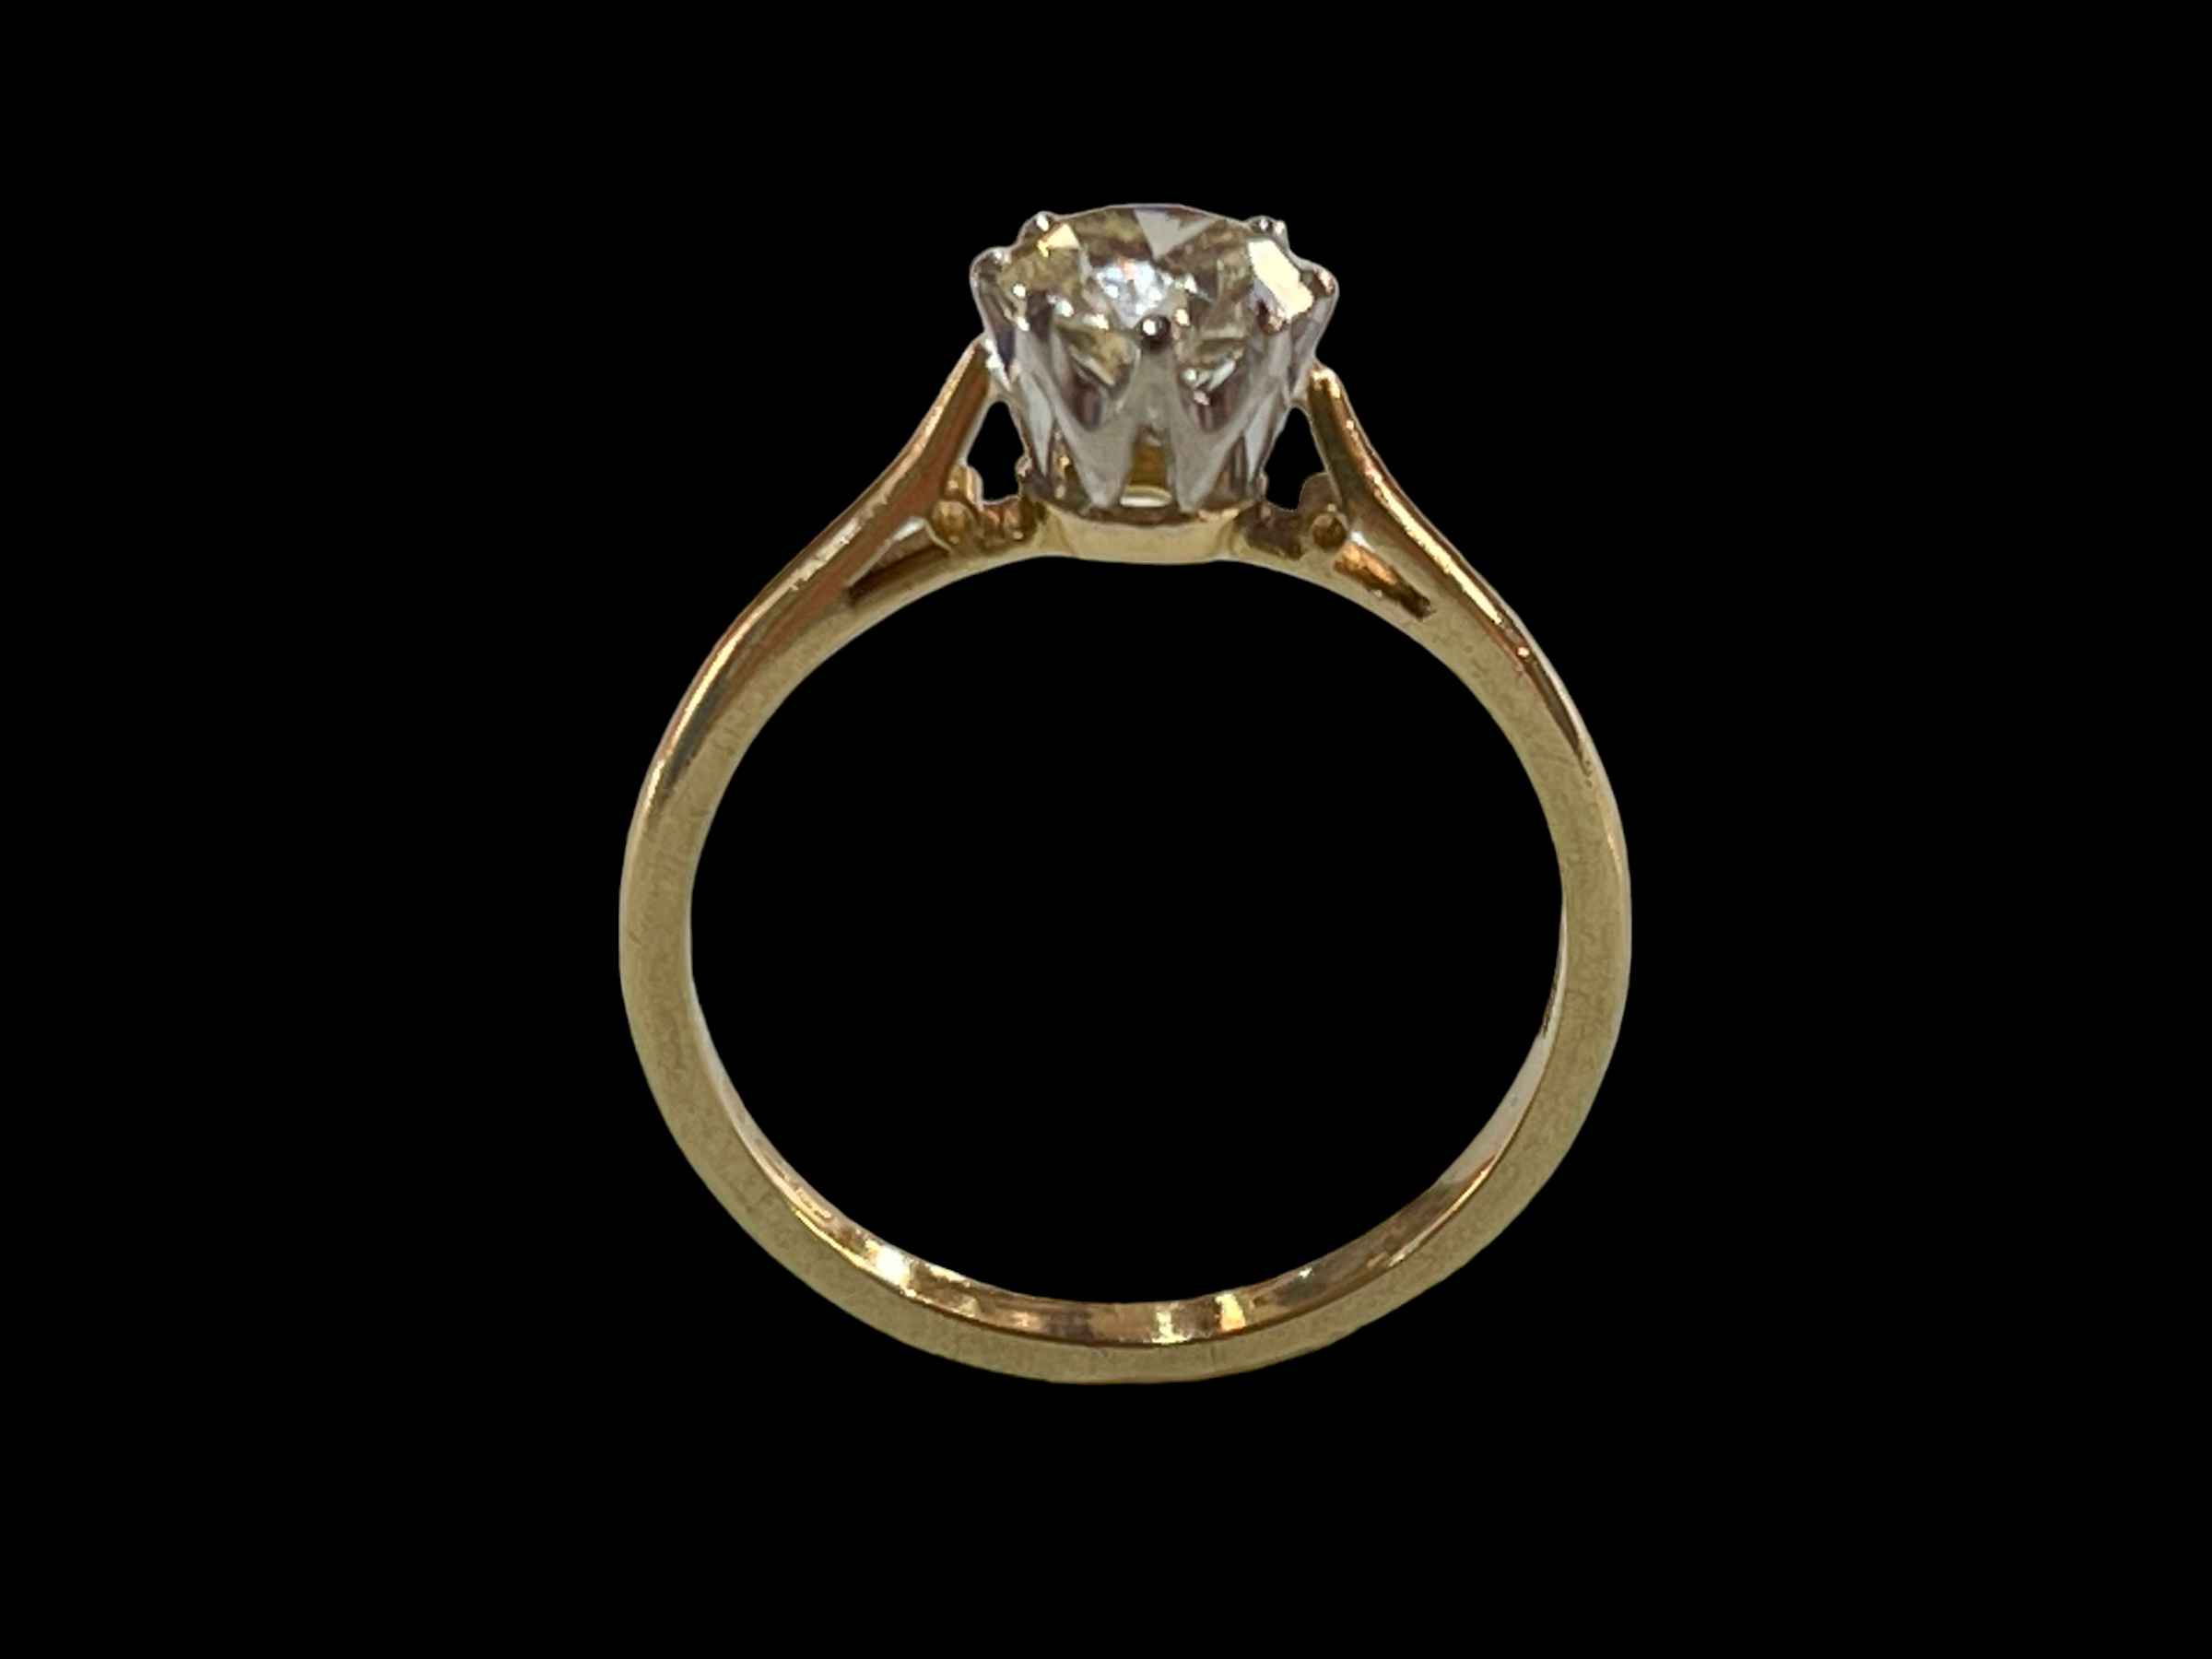 Approximately 1 carat diamond solitaire ring set in 18 carat yellow gold, size Q. - Image 2 of 2